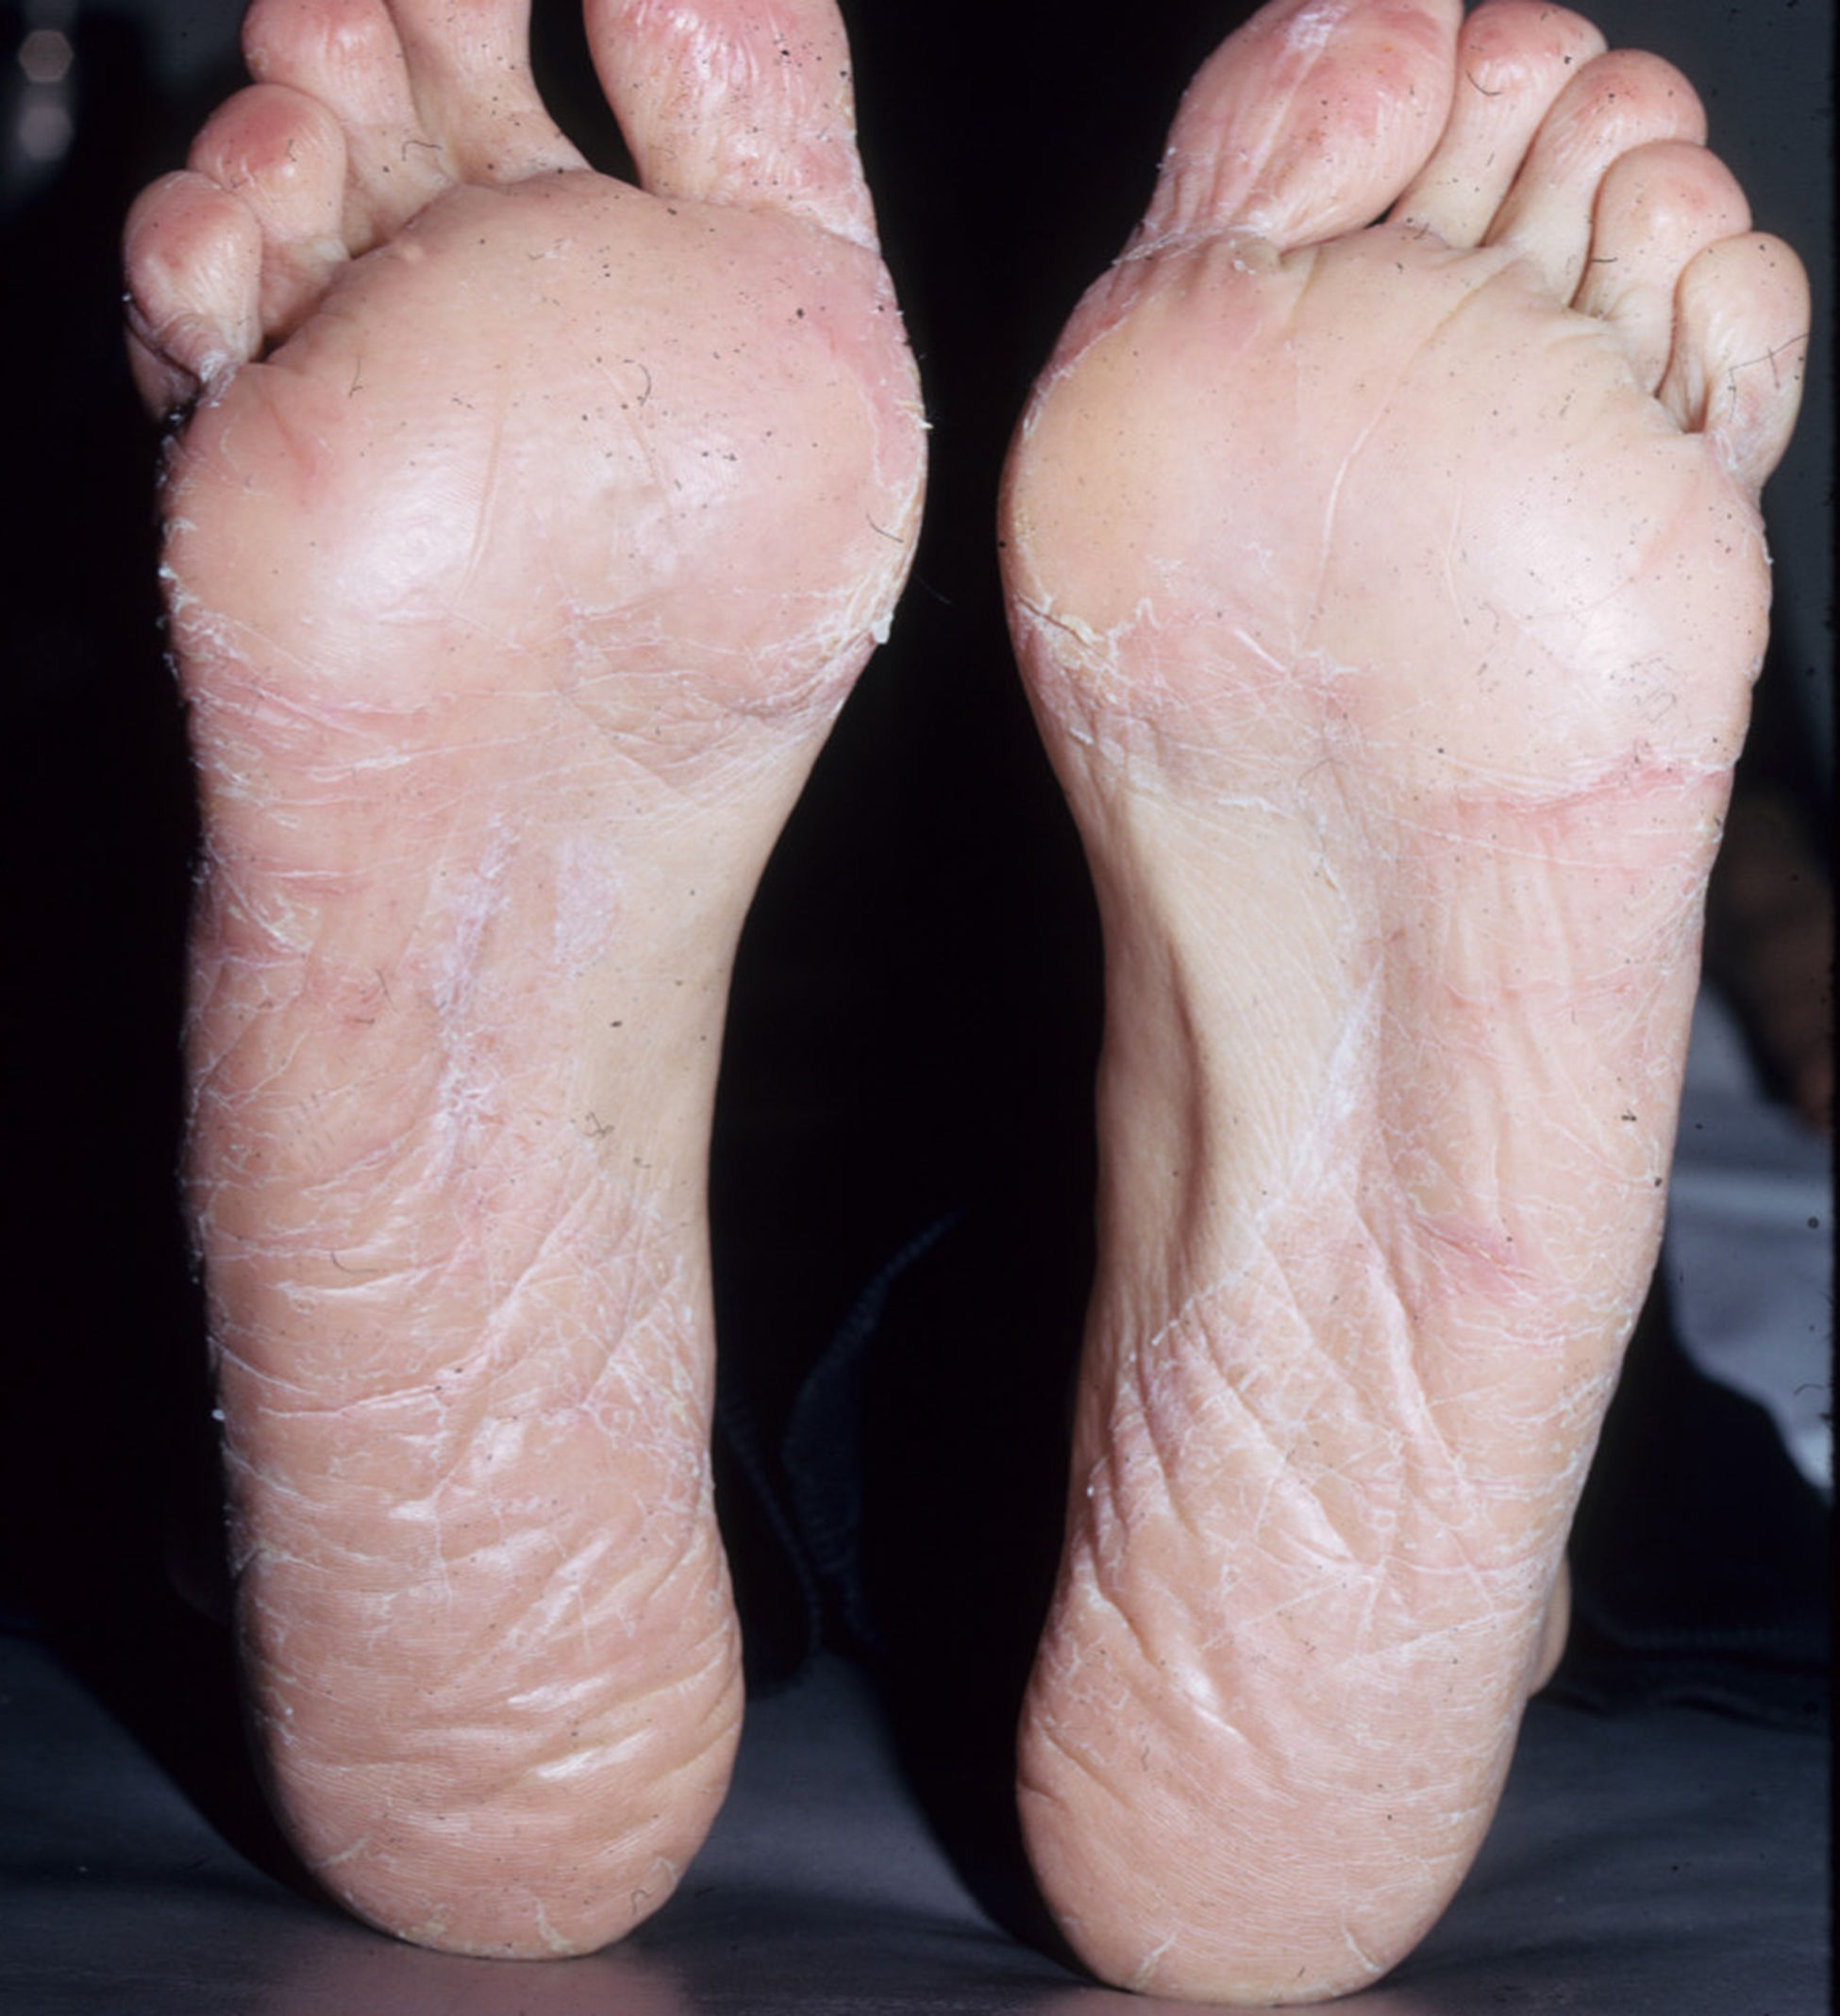 PDF] Allergic Contact Dermatitis of the Foot after use of Mastisol